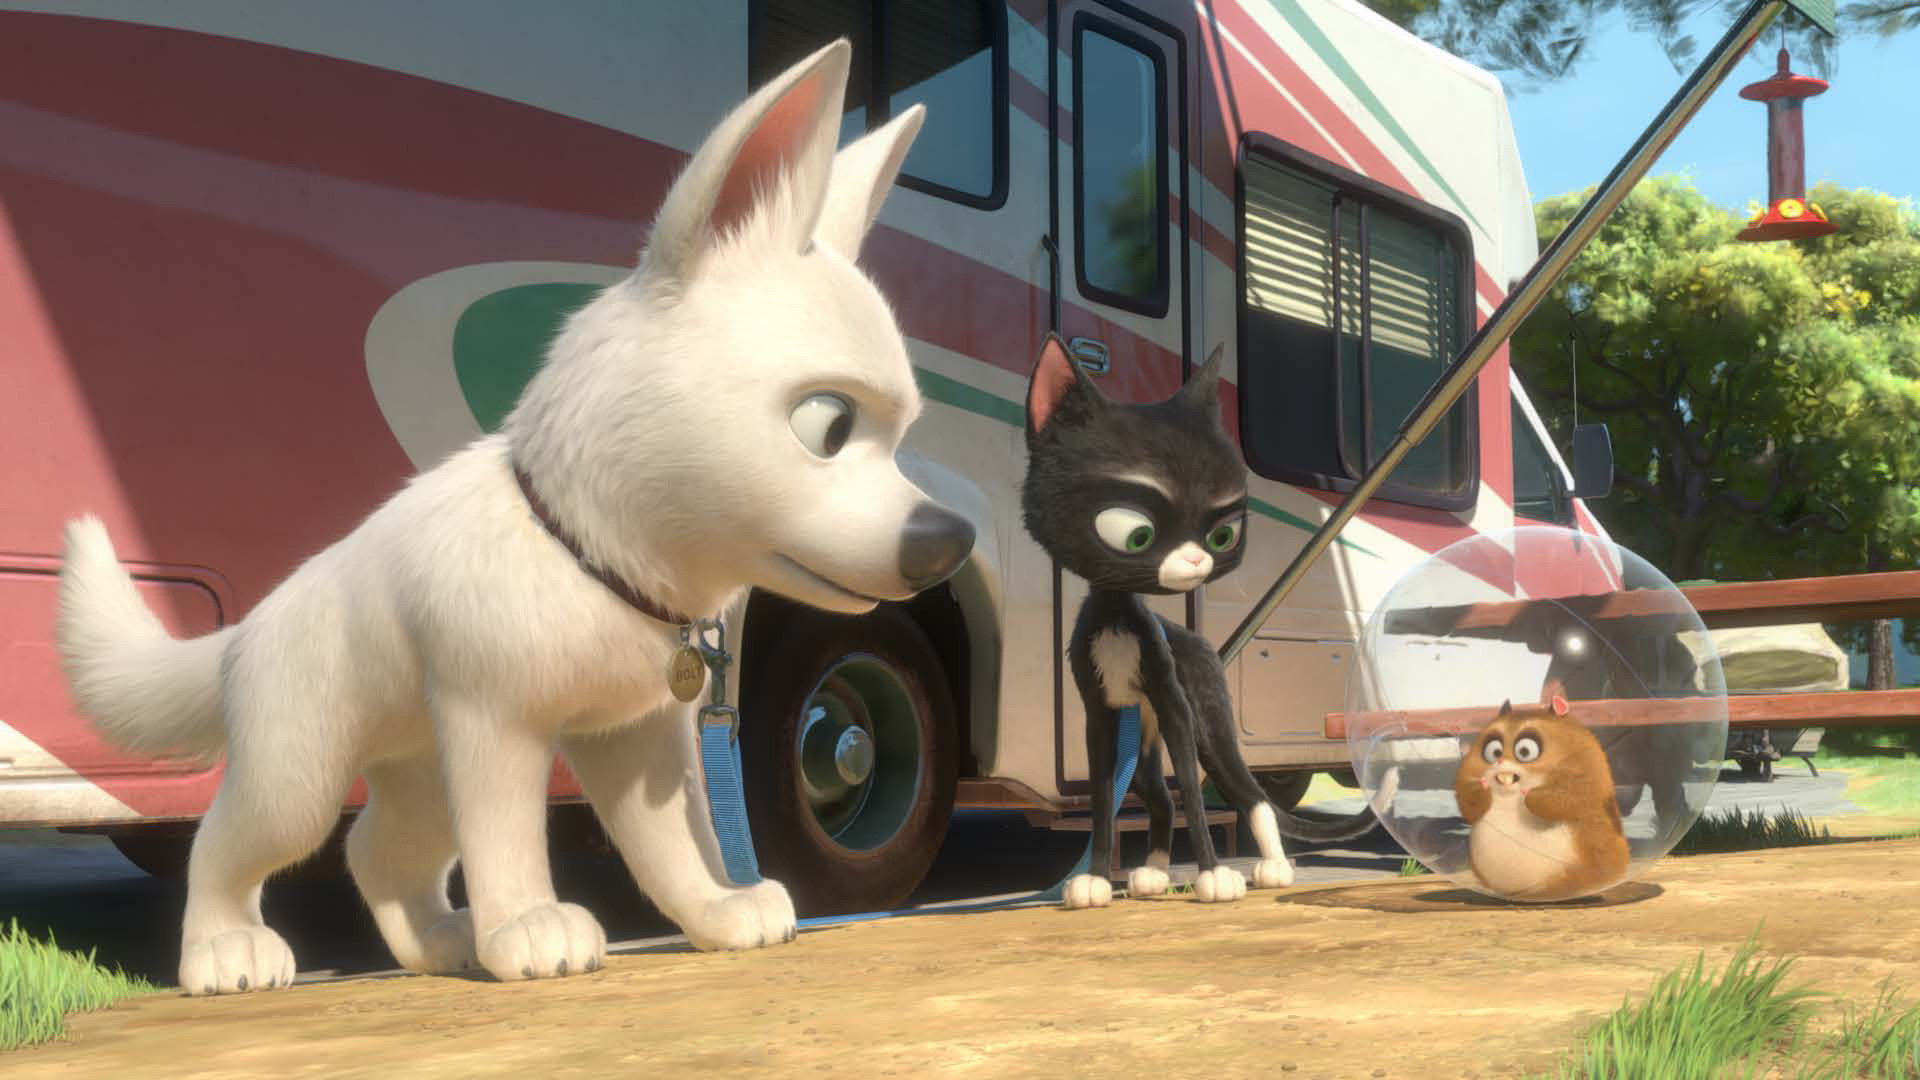 <p>Disney’s “Bolt” is an animated movie about a dog named Bolt (John Travolta), a cat named Mittens (Susie Essman) and a hamster named Rhino (Mark Walton), all of whom embark on a cross-country trip to reunite Bolt with his owner, Penny (Miley Cyrus). “Bolt” raked in $310 million and earned Academy Award and Golden Globe nominations for Best Animated Feature, but lost both to “WALL-E.” </p>